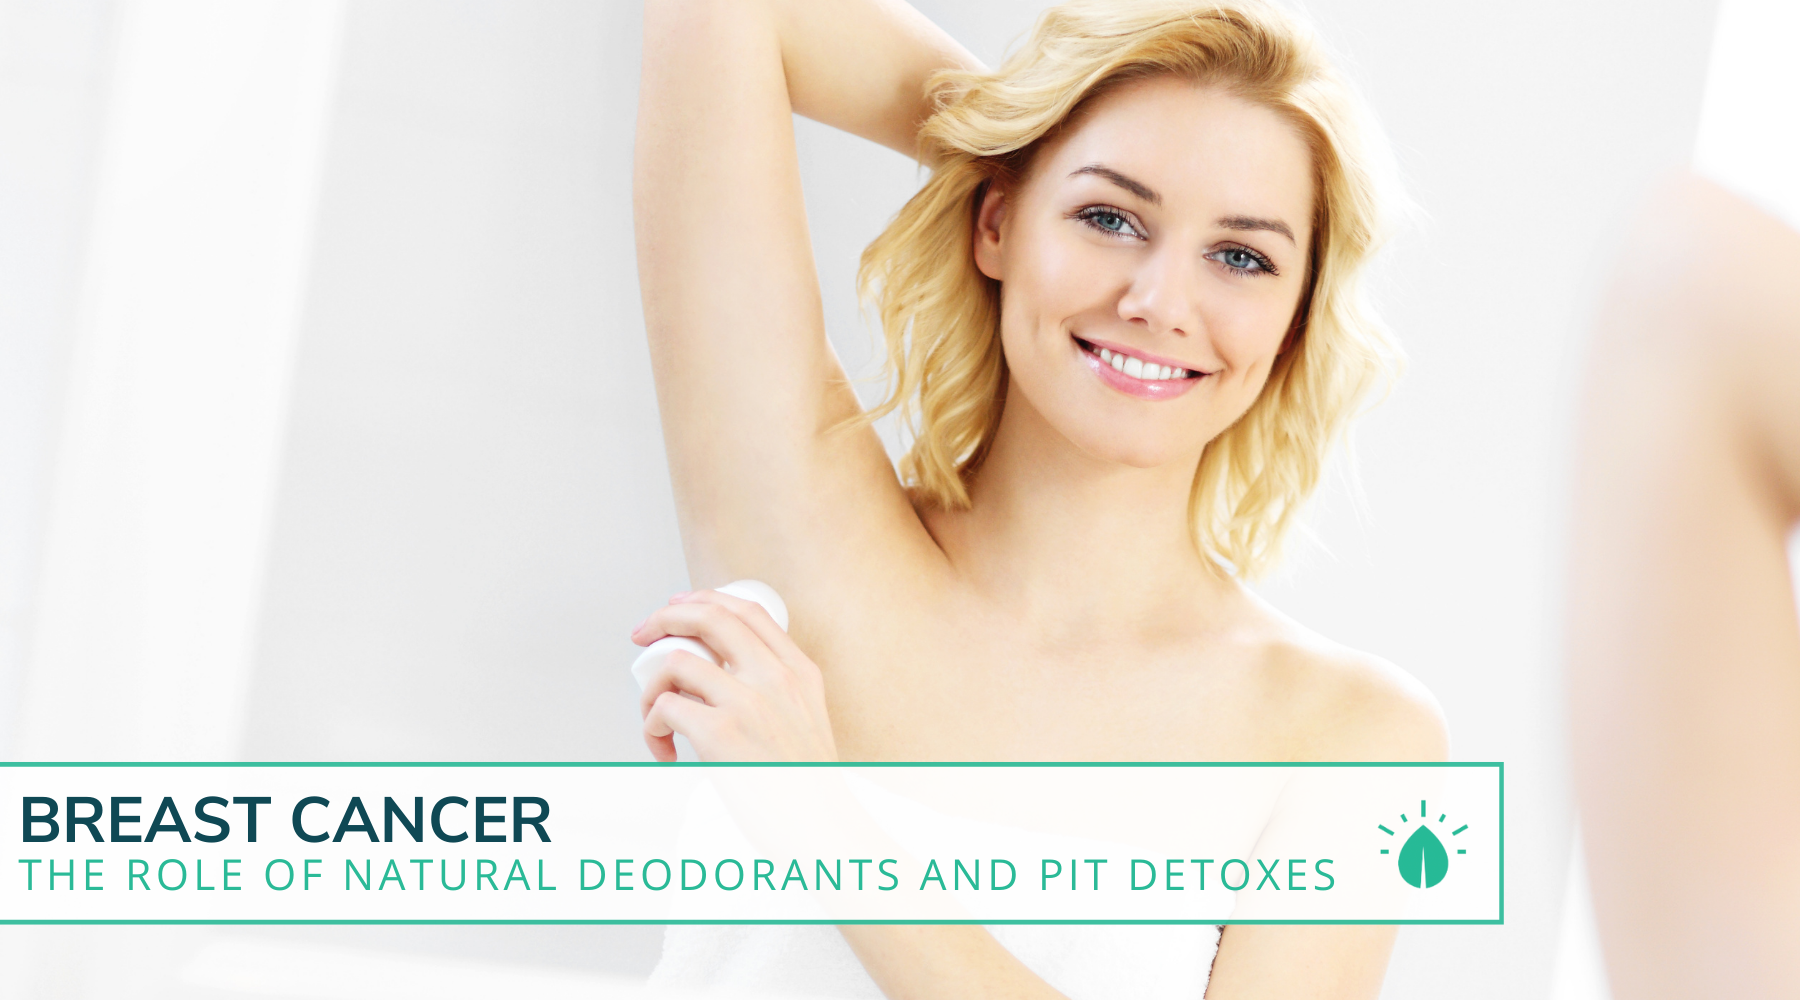 Breast Cancer: The Role Of Natural Deodorants and Pit Detoxes